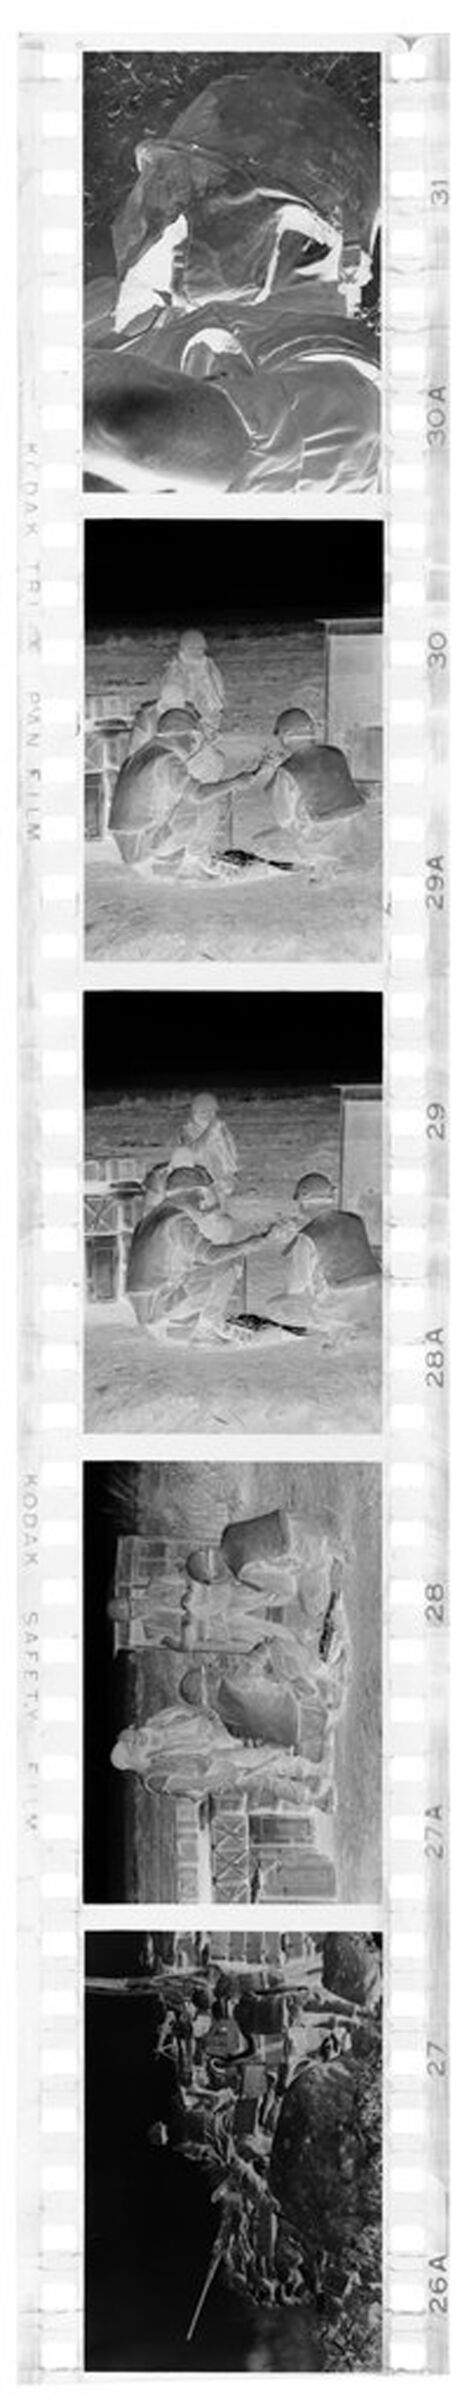 Untitled (Soldiers Resting In The Field, Vietnam)